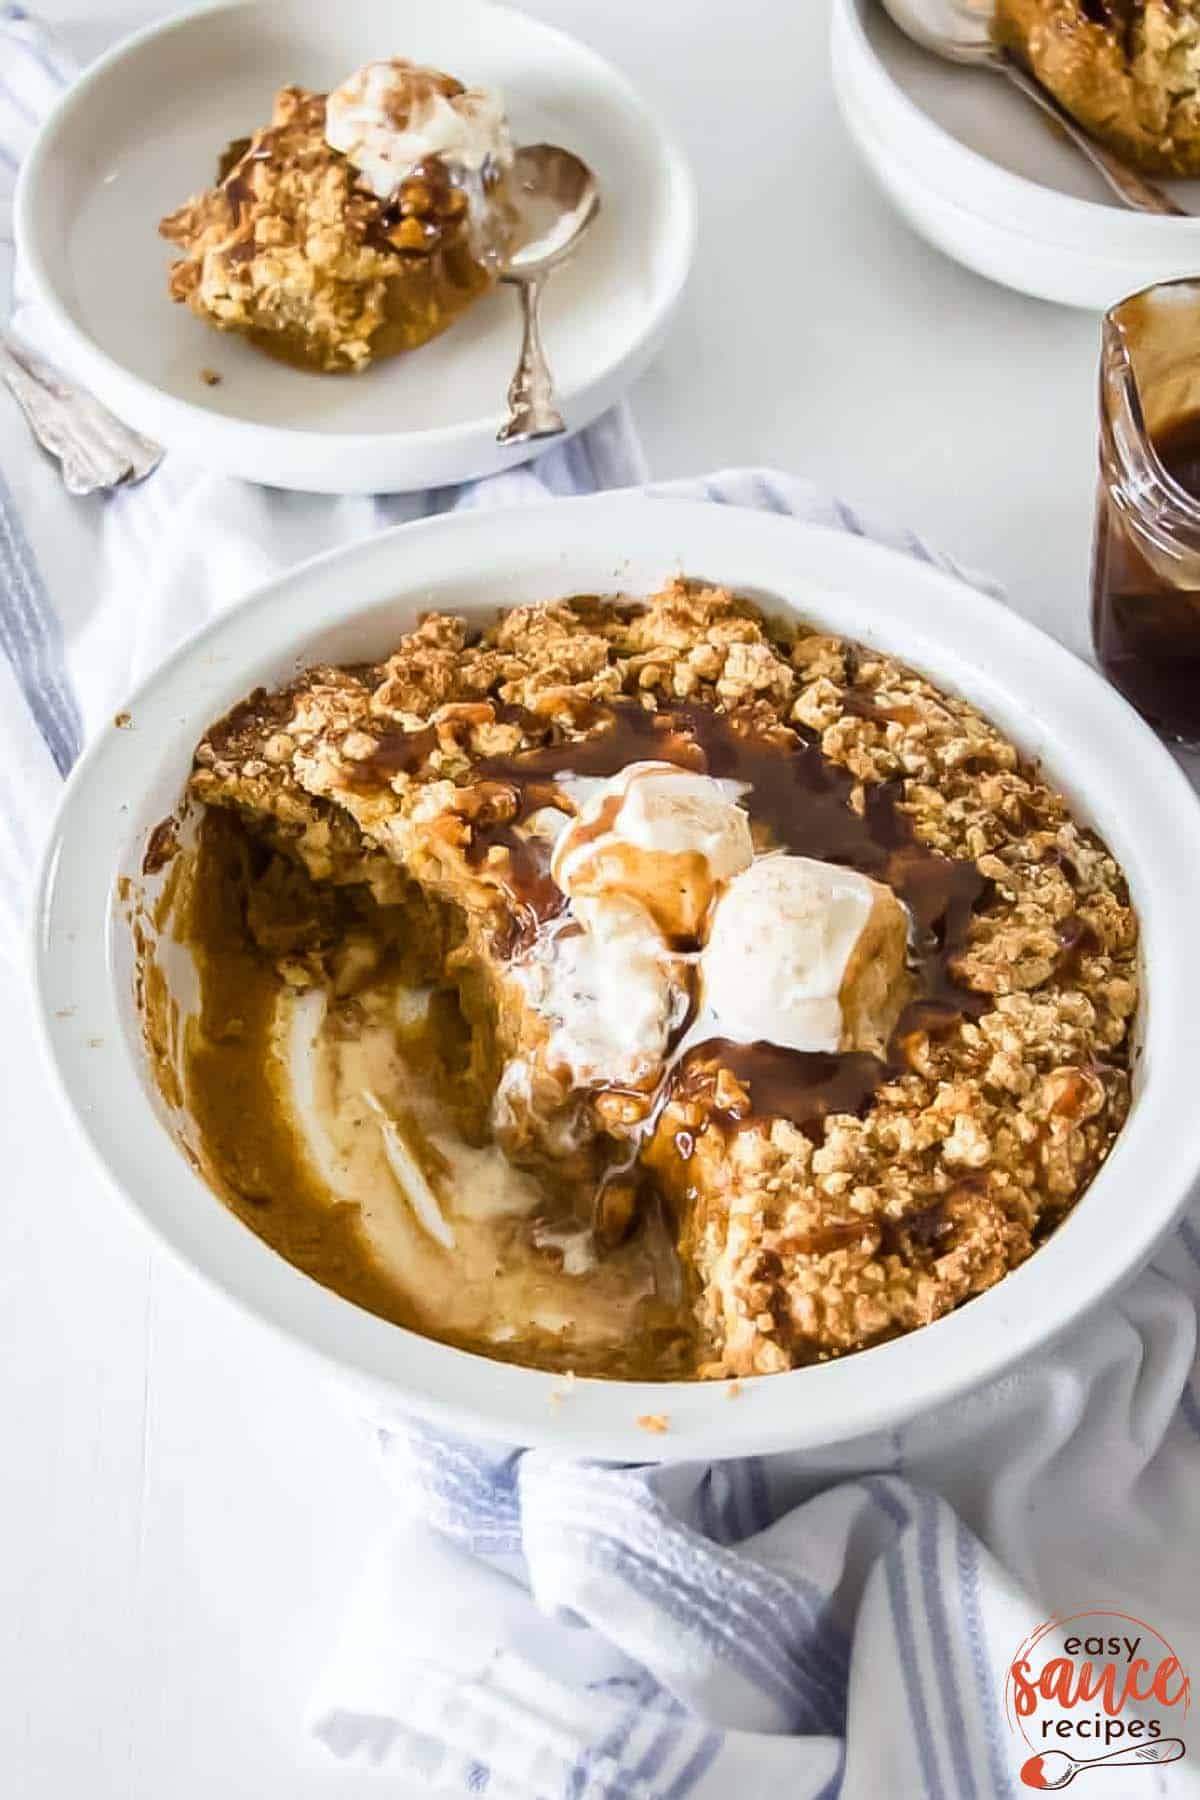 pumpkin cobbler in a white bowl with scoops of ice cream and toffee sauce on top